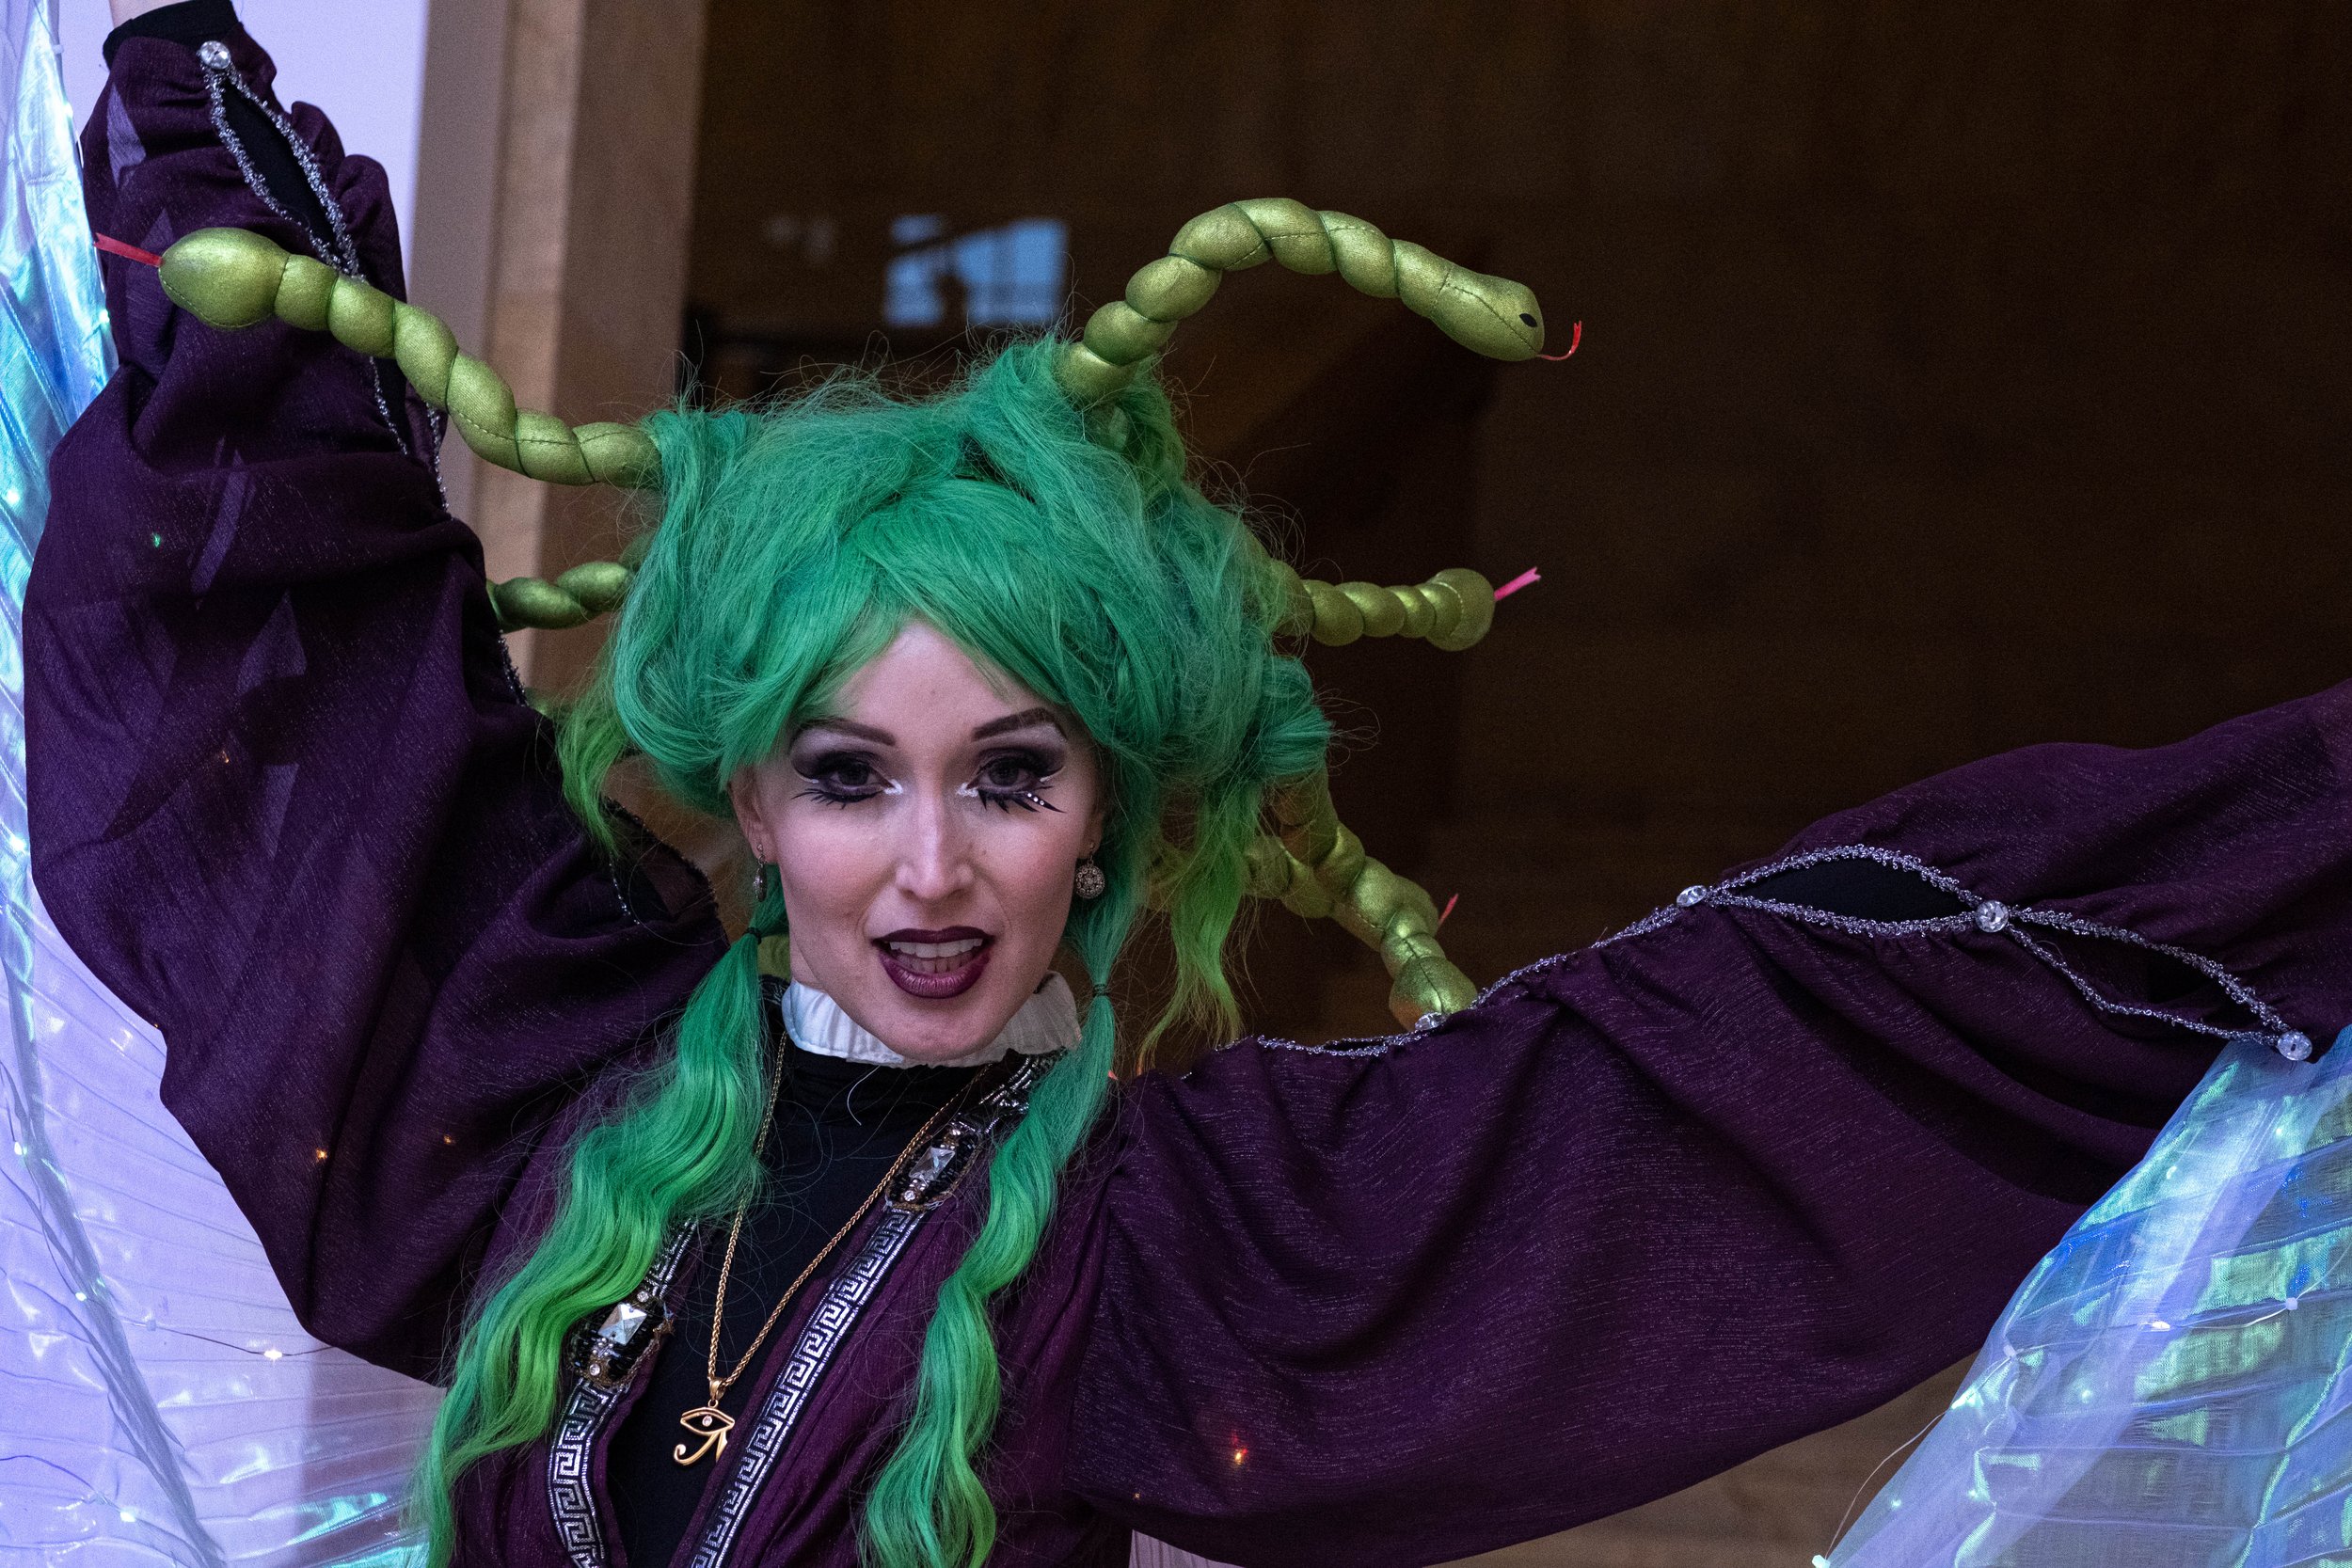  Medusa, member of The Troubadour Theater, aka "The Troubies," dances at the Getty Villa Museum in Pacific Palisades, Calif. on Wednesday, March 22, 2023 at College Night. (Akemi Rico | The Corsair) 